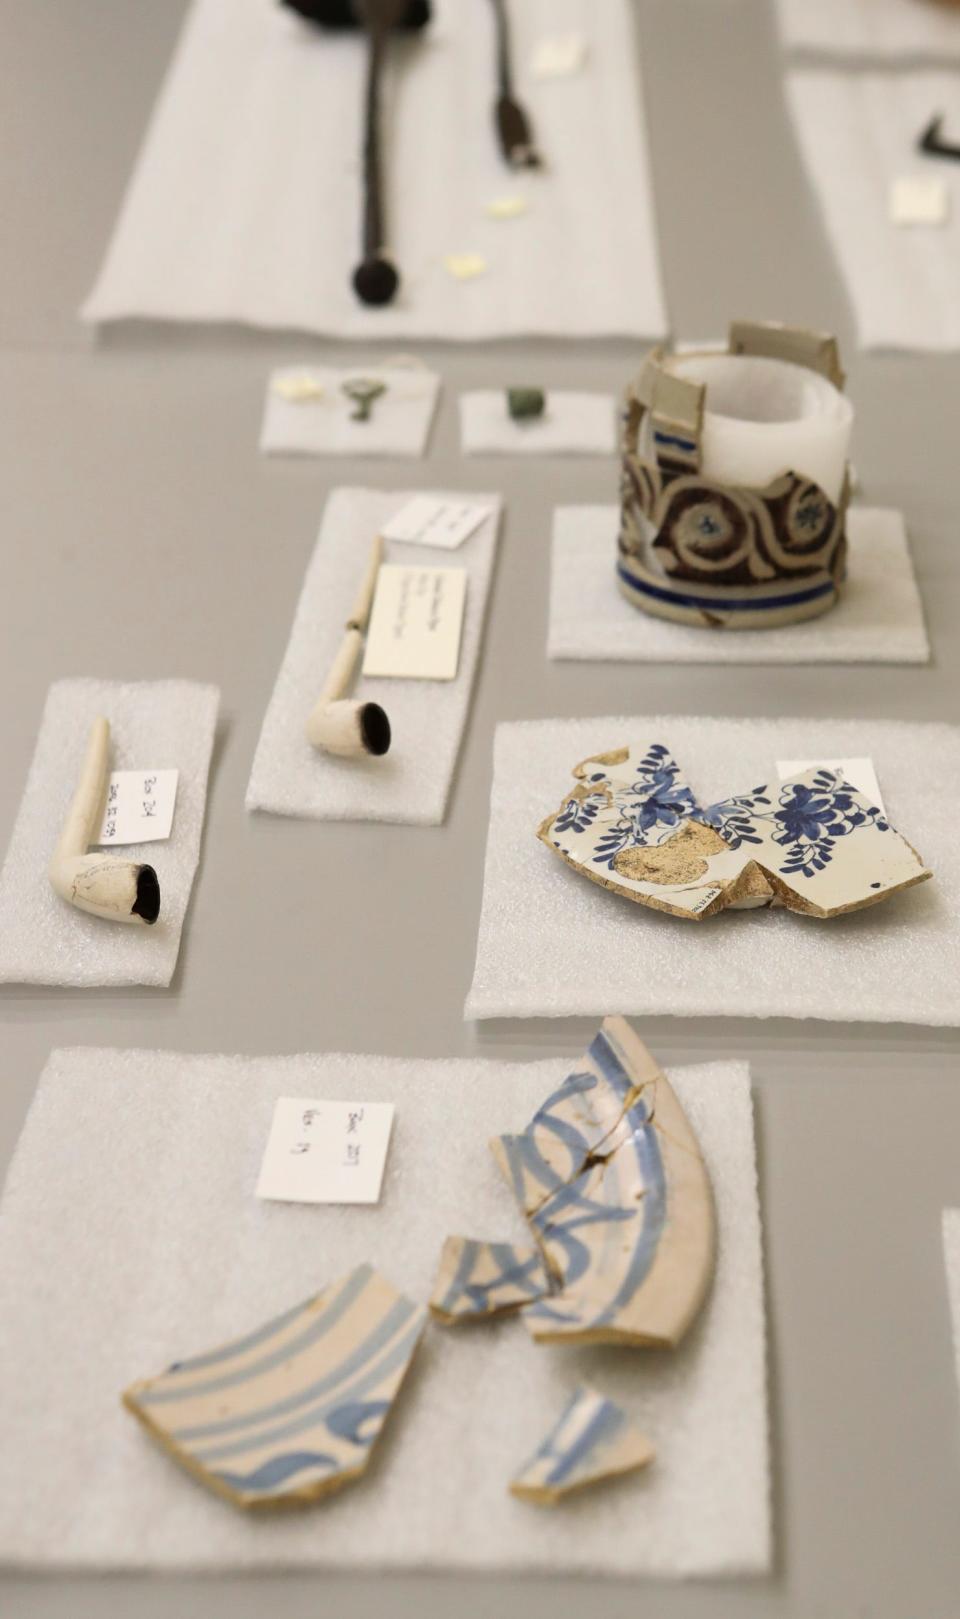 Objects, including pipes, ceramic vessels and plates and tools from the archaeological dig of Avery's Rest are displayed at the State of Delaware Center for Material Culture in Dover. Study of the site - which included multiple well-preserved graves- is acclaimed as providing a fuller picture of life in colonial Delaware and of its inhabitants.